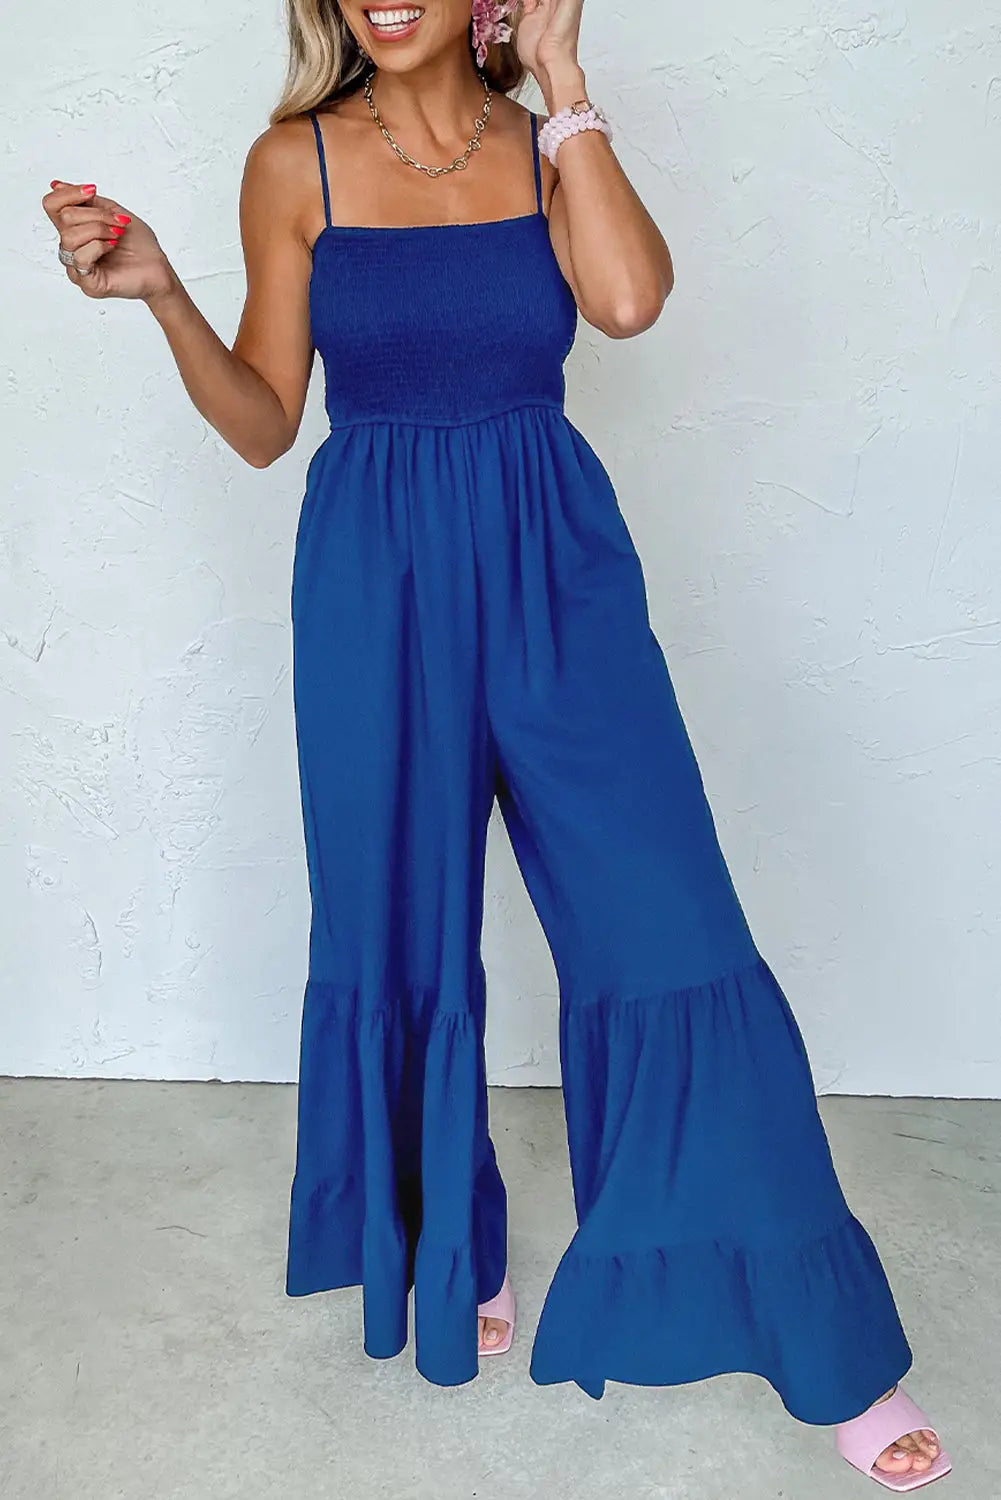 Navy blue spaghetti straps smocked ruffled wide leg jumpsuit - l / 100% polyester - jumpsuits & rompers